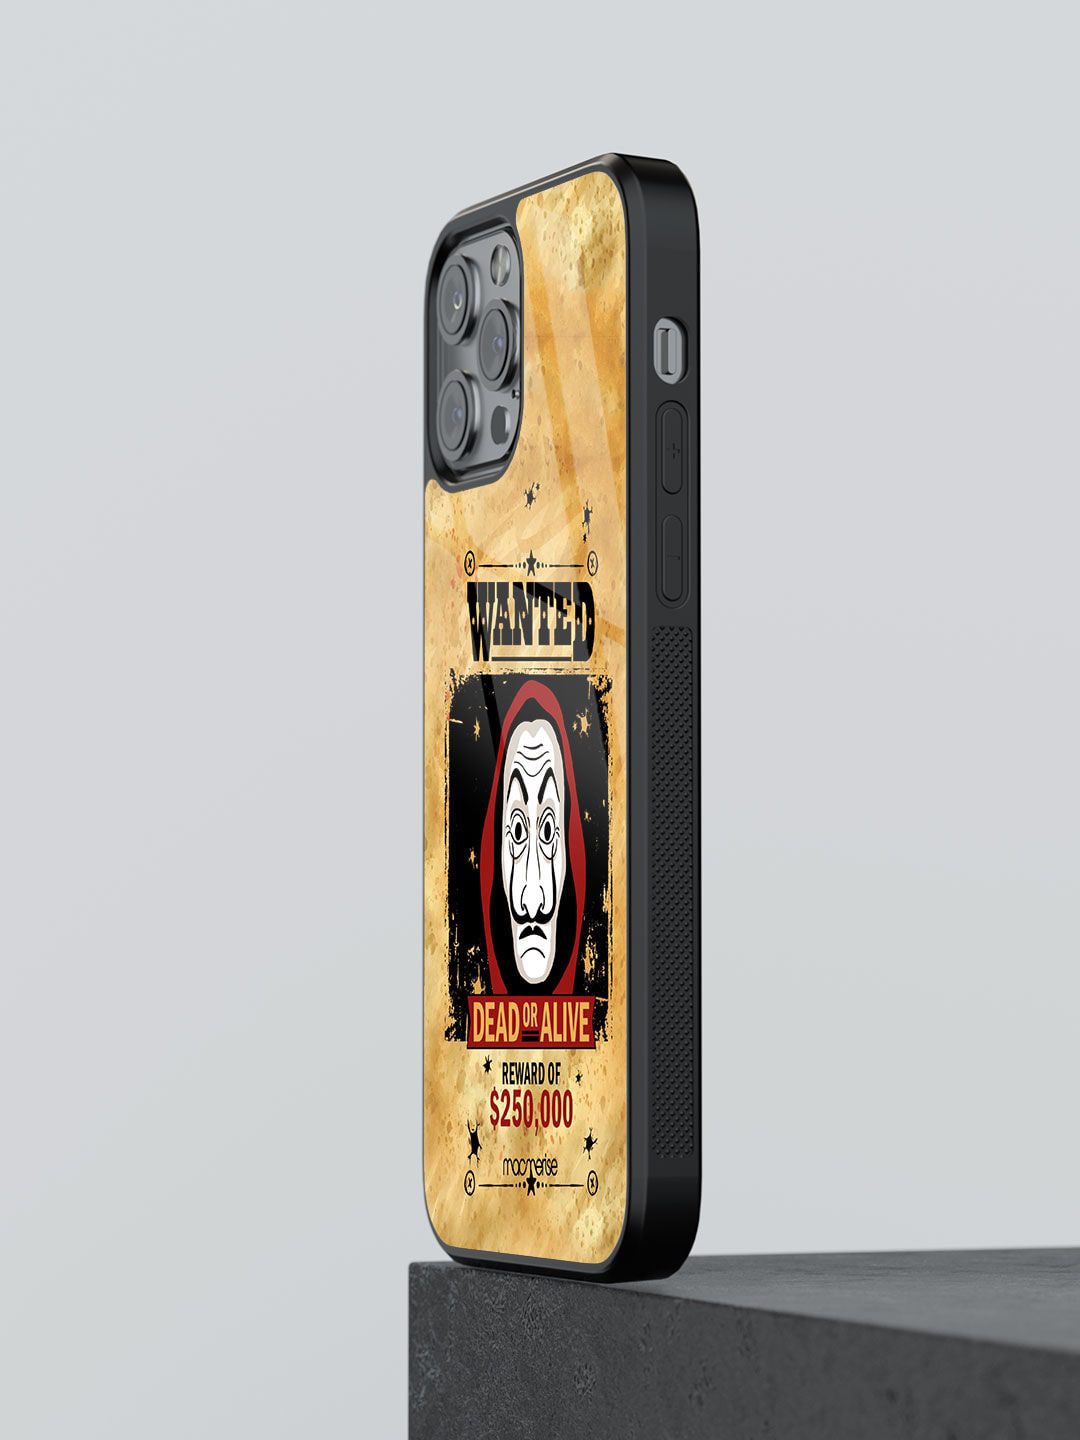 macmerise Yellow Printed Dead Or Alive iPhone 12 Pro Back Case Price in India